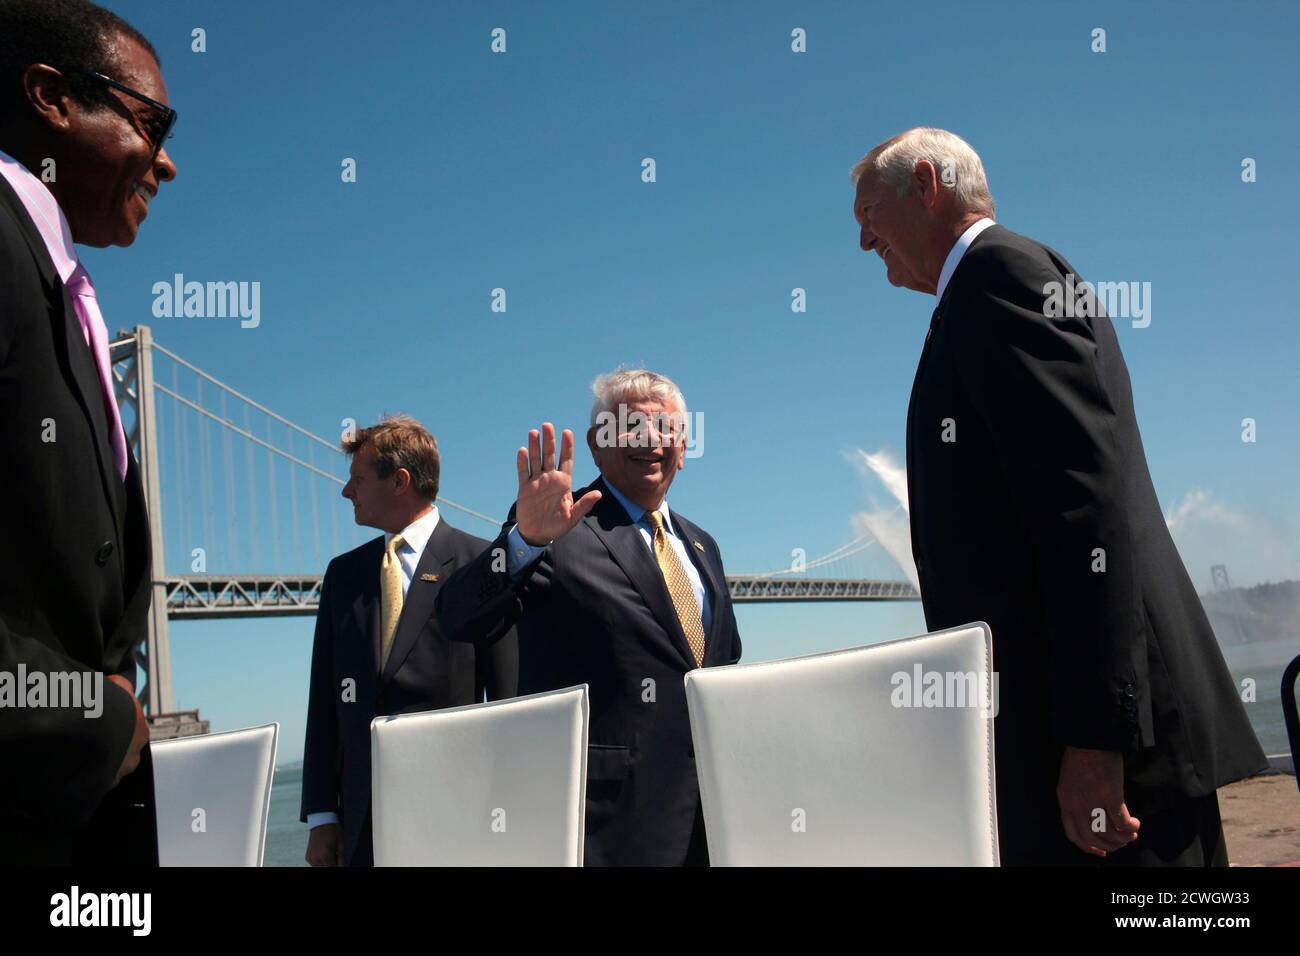 NBA Commissioner David Stern (C) gestures as he is joined by Golden State Warriors executives, including team advisor Jerry West (R), in announcing the team's plans of building a new waterfront sports and entertainment arena on Piers 30-32 in San Francisco, California May 22, 2012. The Warriors, now located in Oakland, plans to move into the privately financed facility in time for the 2017-18 season. REUTERS/Robert Galbraith  (UNITED STATES - Tags: SPORT BASKETBALL) Stock Photo